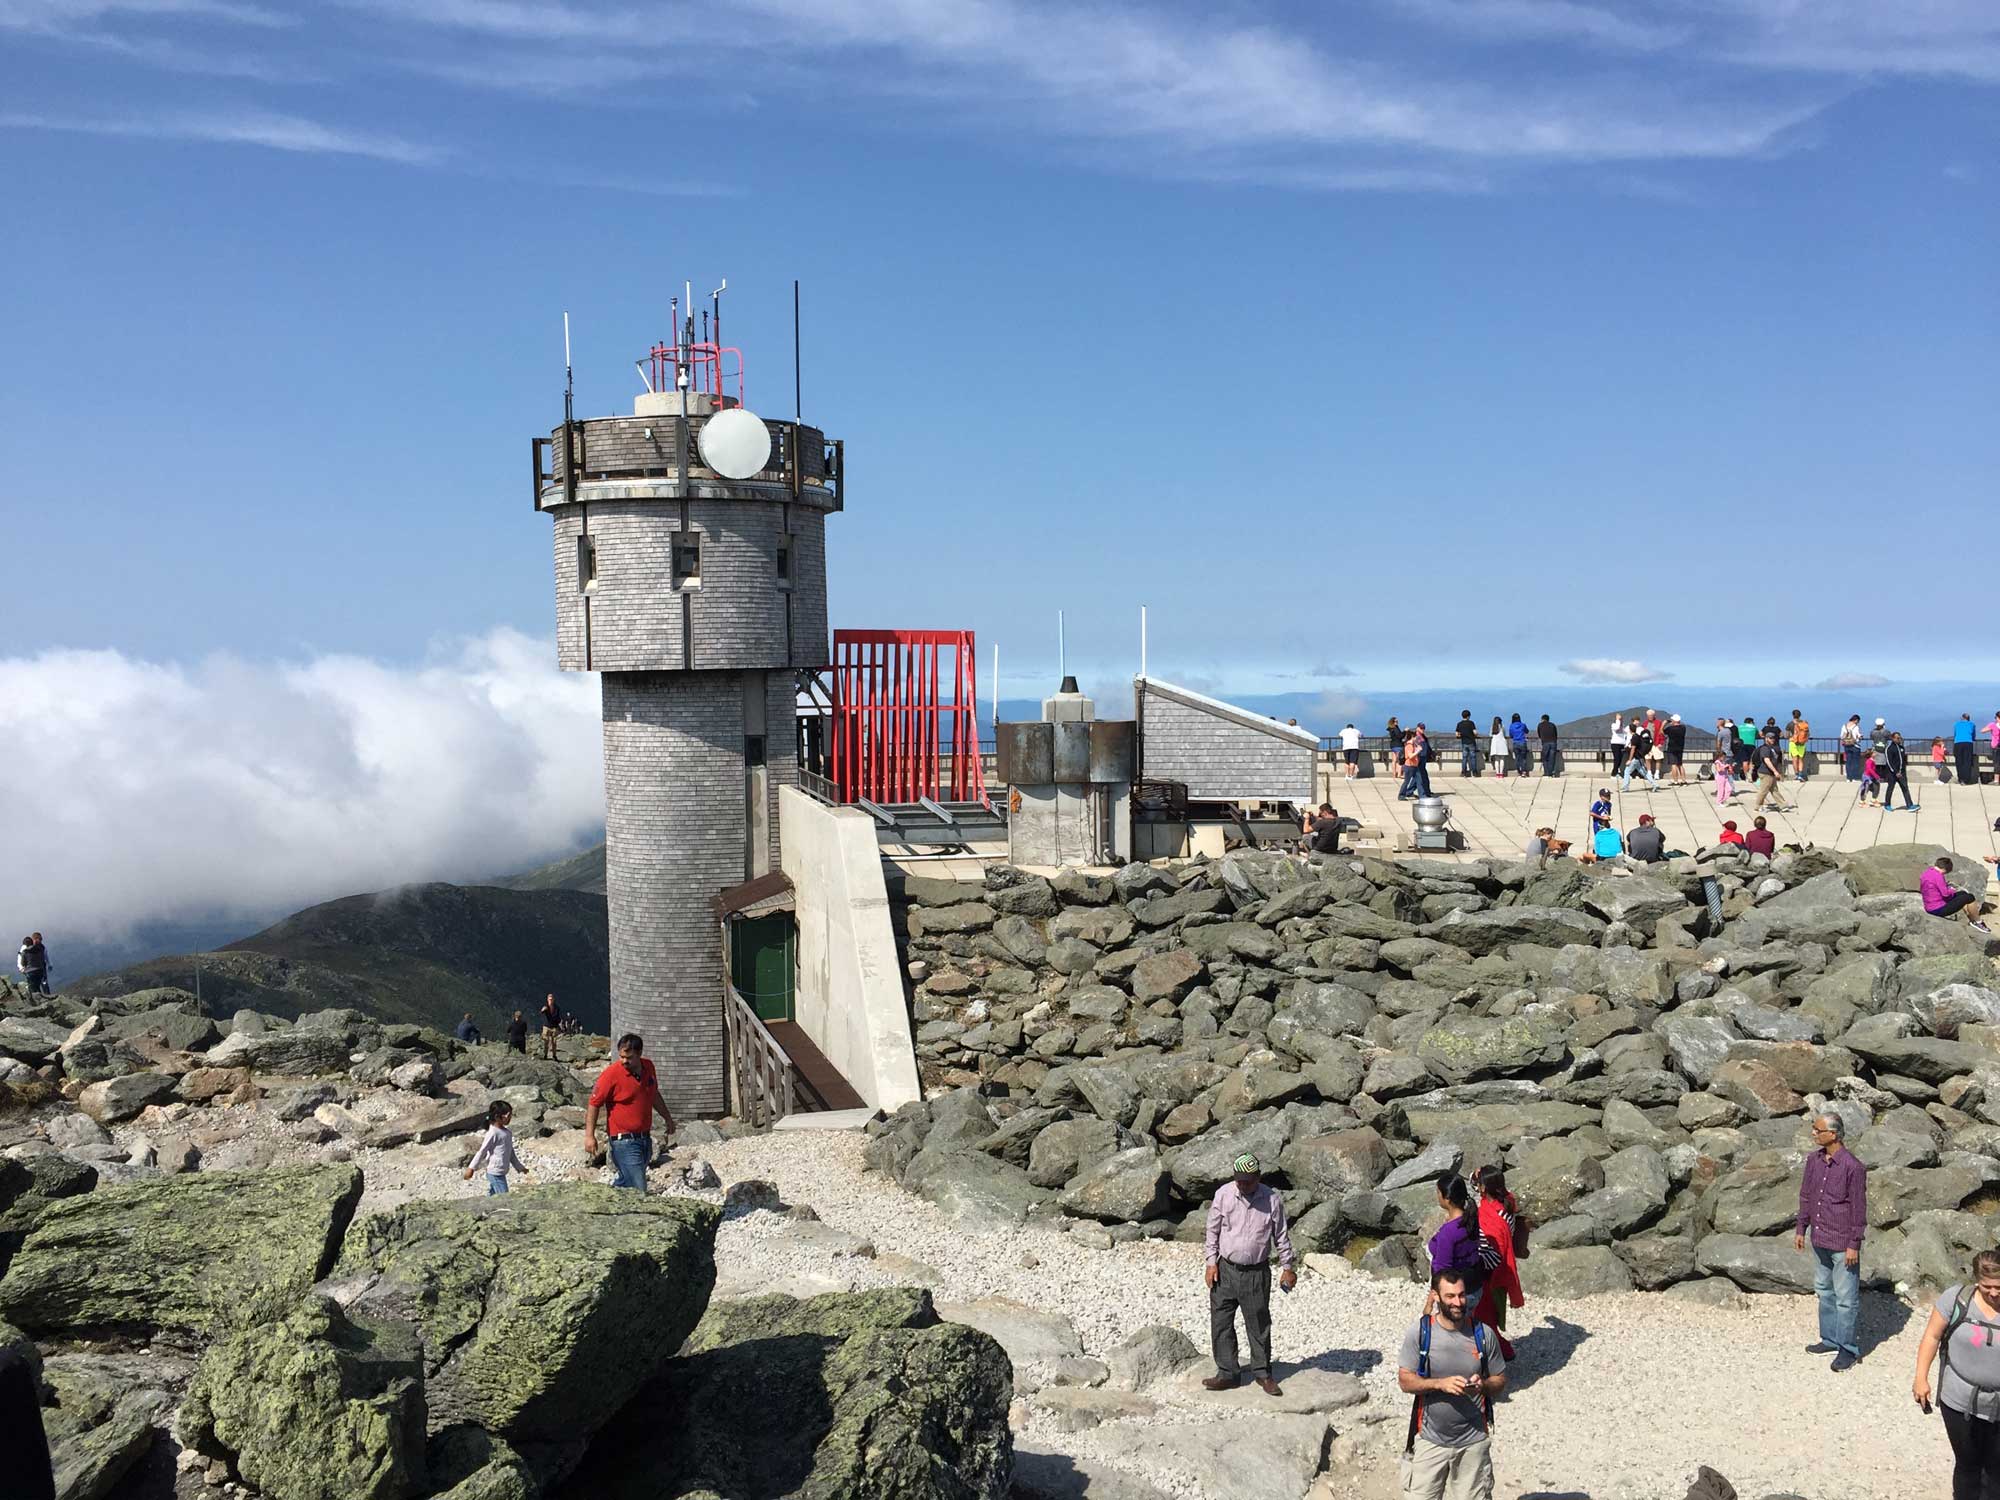 Photograph of the observation tower at Mount Washington Observatory in New Hampshire. The photo shows a cylindrical stone tower, trails, and a viewing area, with many people waking and standing.